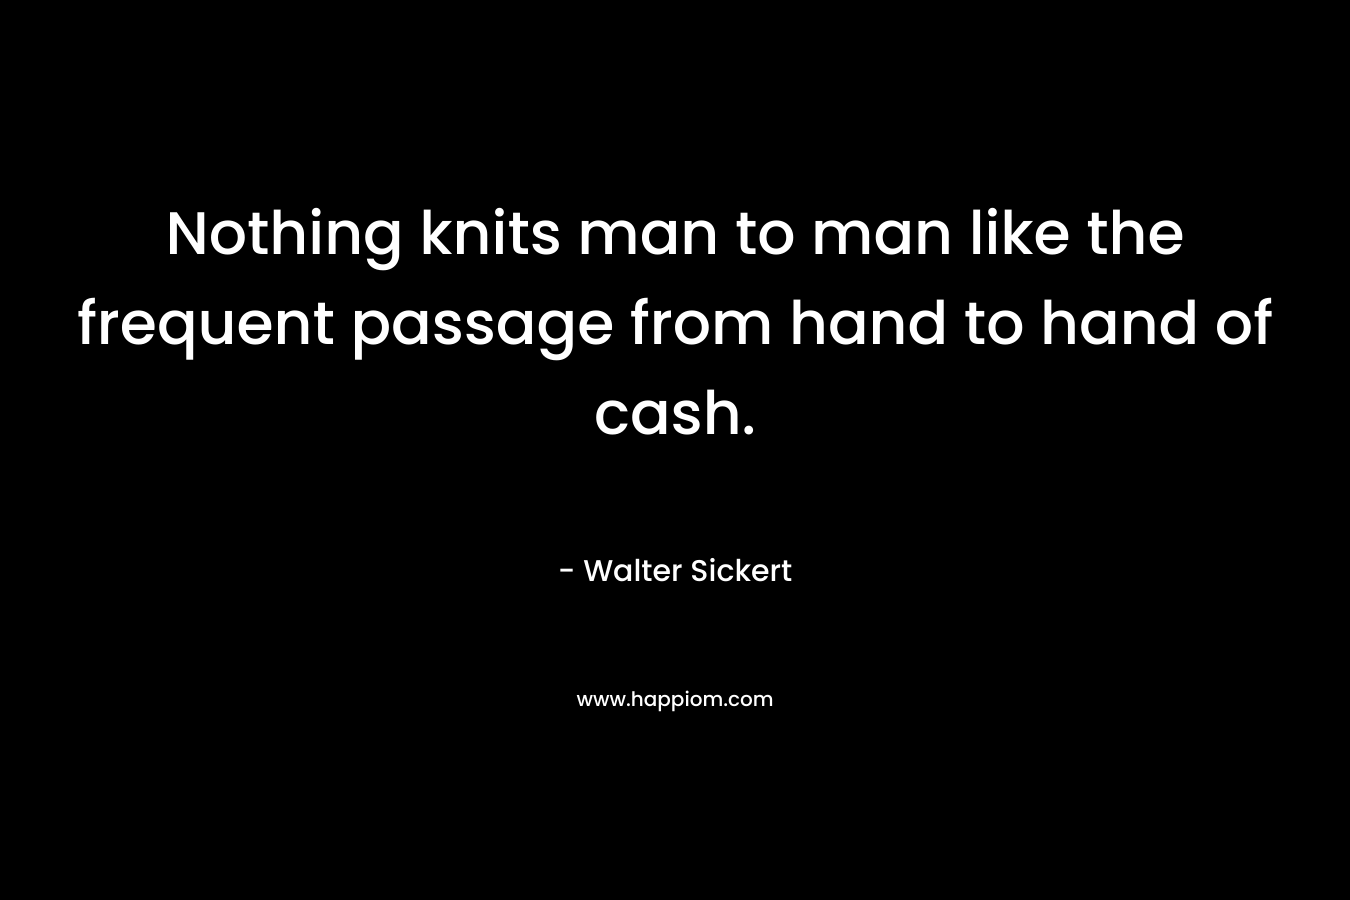 Nothing knits man to man like the frequent passage from hand to hand of cash.